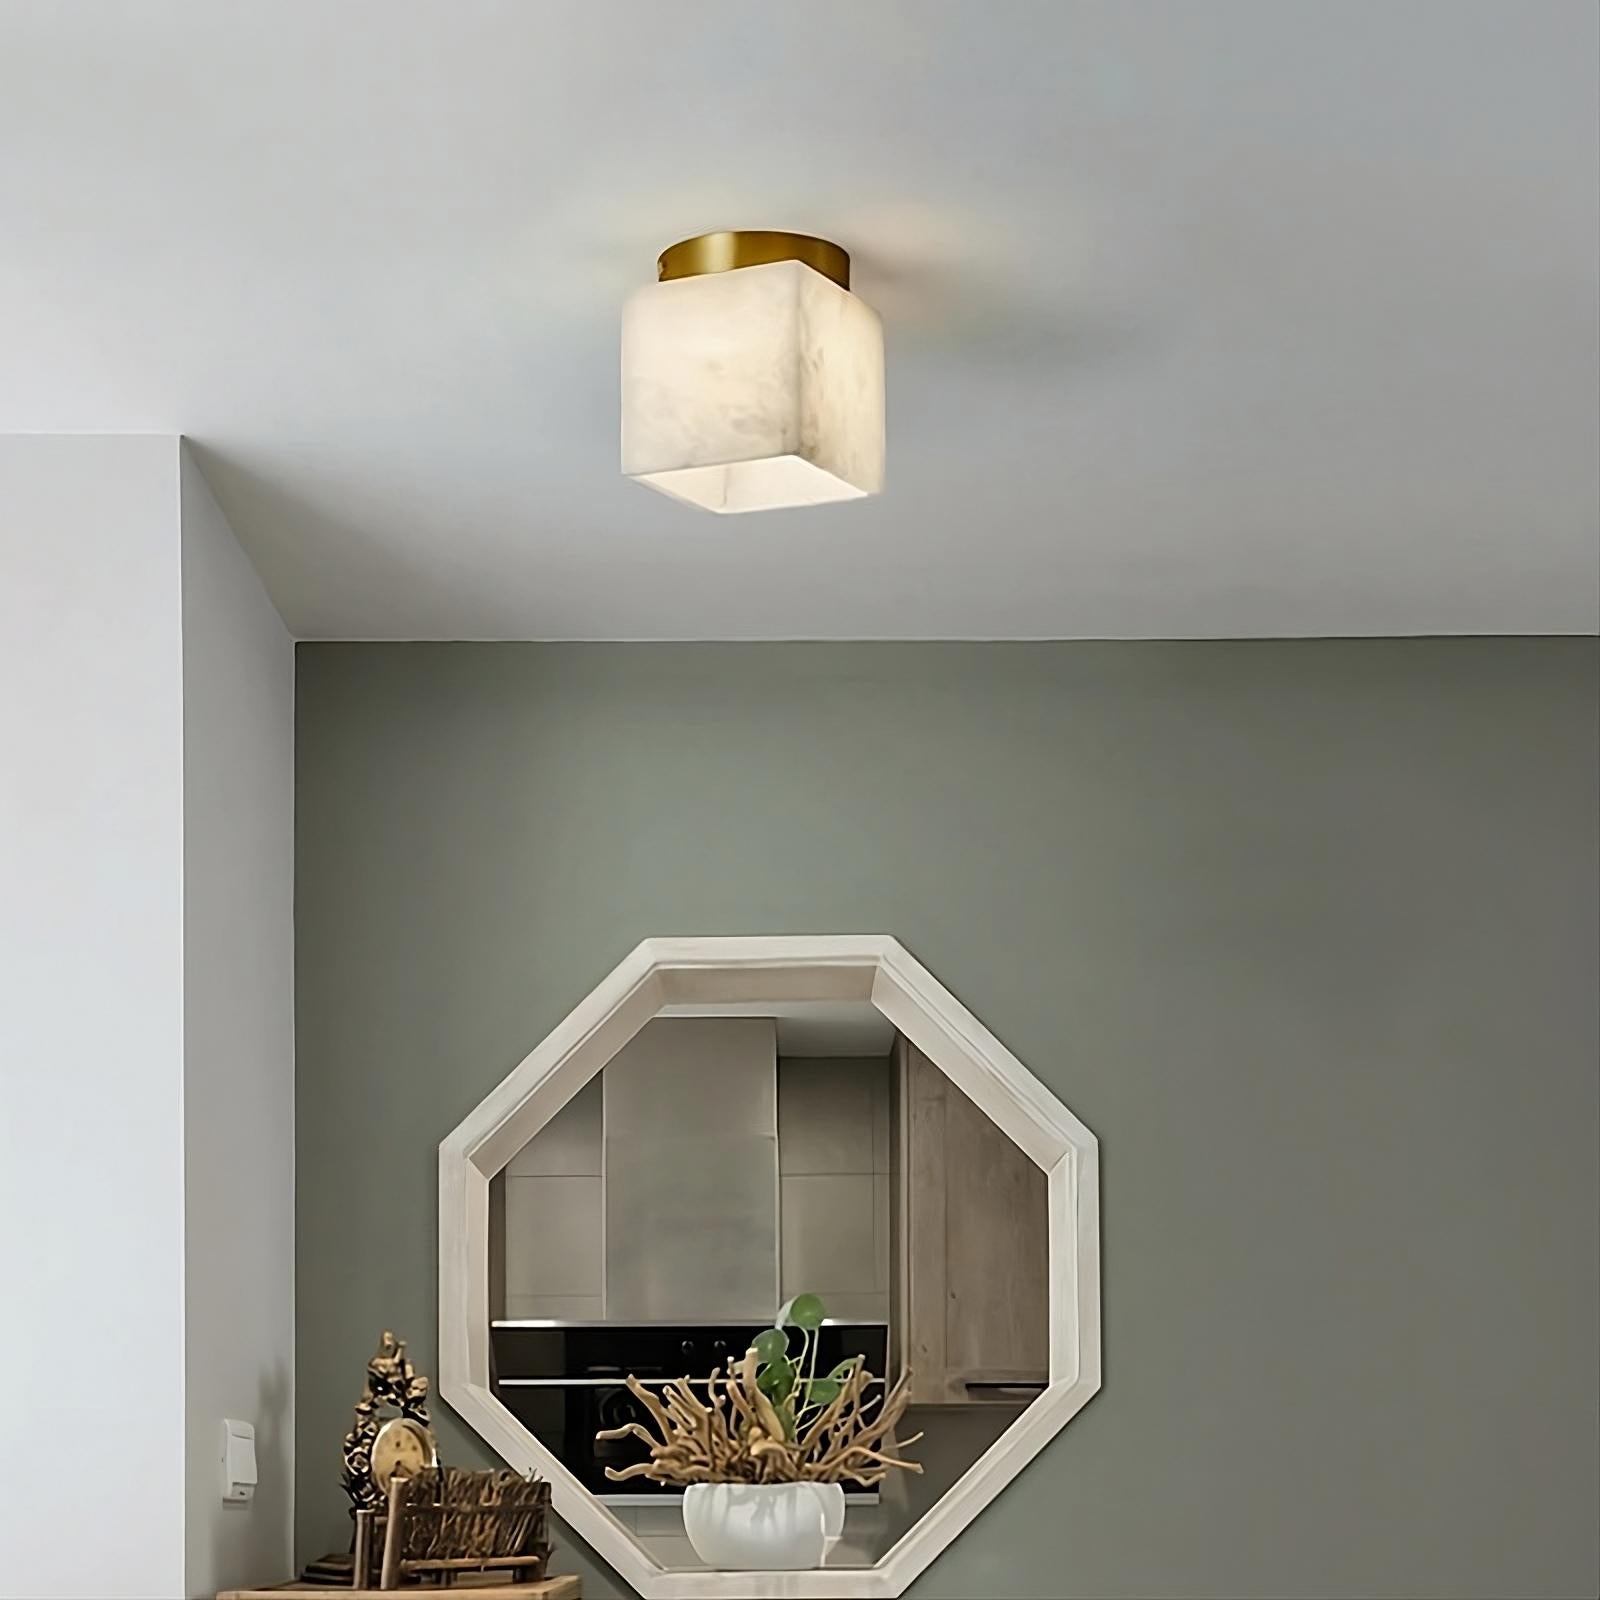 A modern room with a green and white color scheme. A Natural Marble Hallway Ceiling Light Fixture by Morsale.com is prominent. Below it is a hexagonal mirror mounted on the wall, reflecting part of the kitchen. The small table nearby, adorned with decor items, stands out against the Spanish marble backdrop.